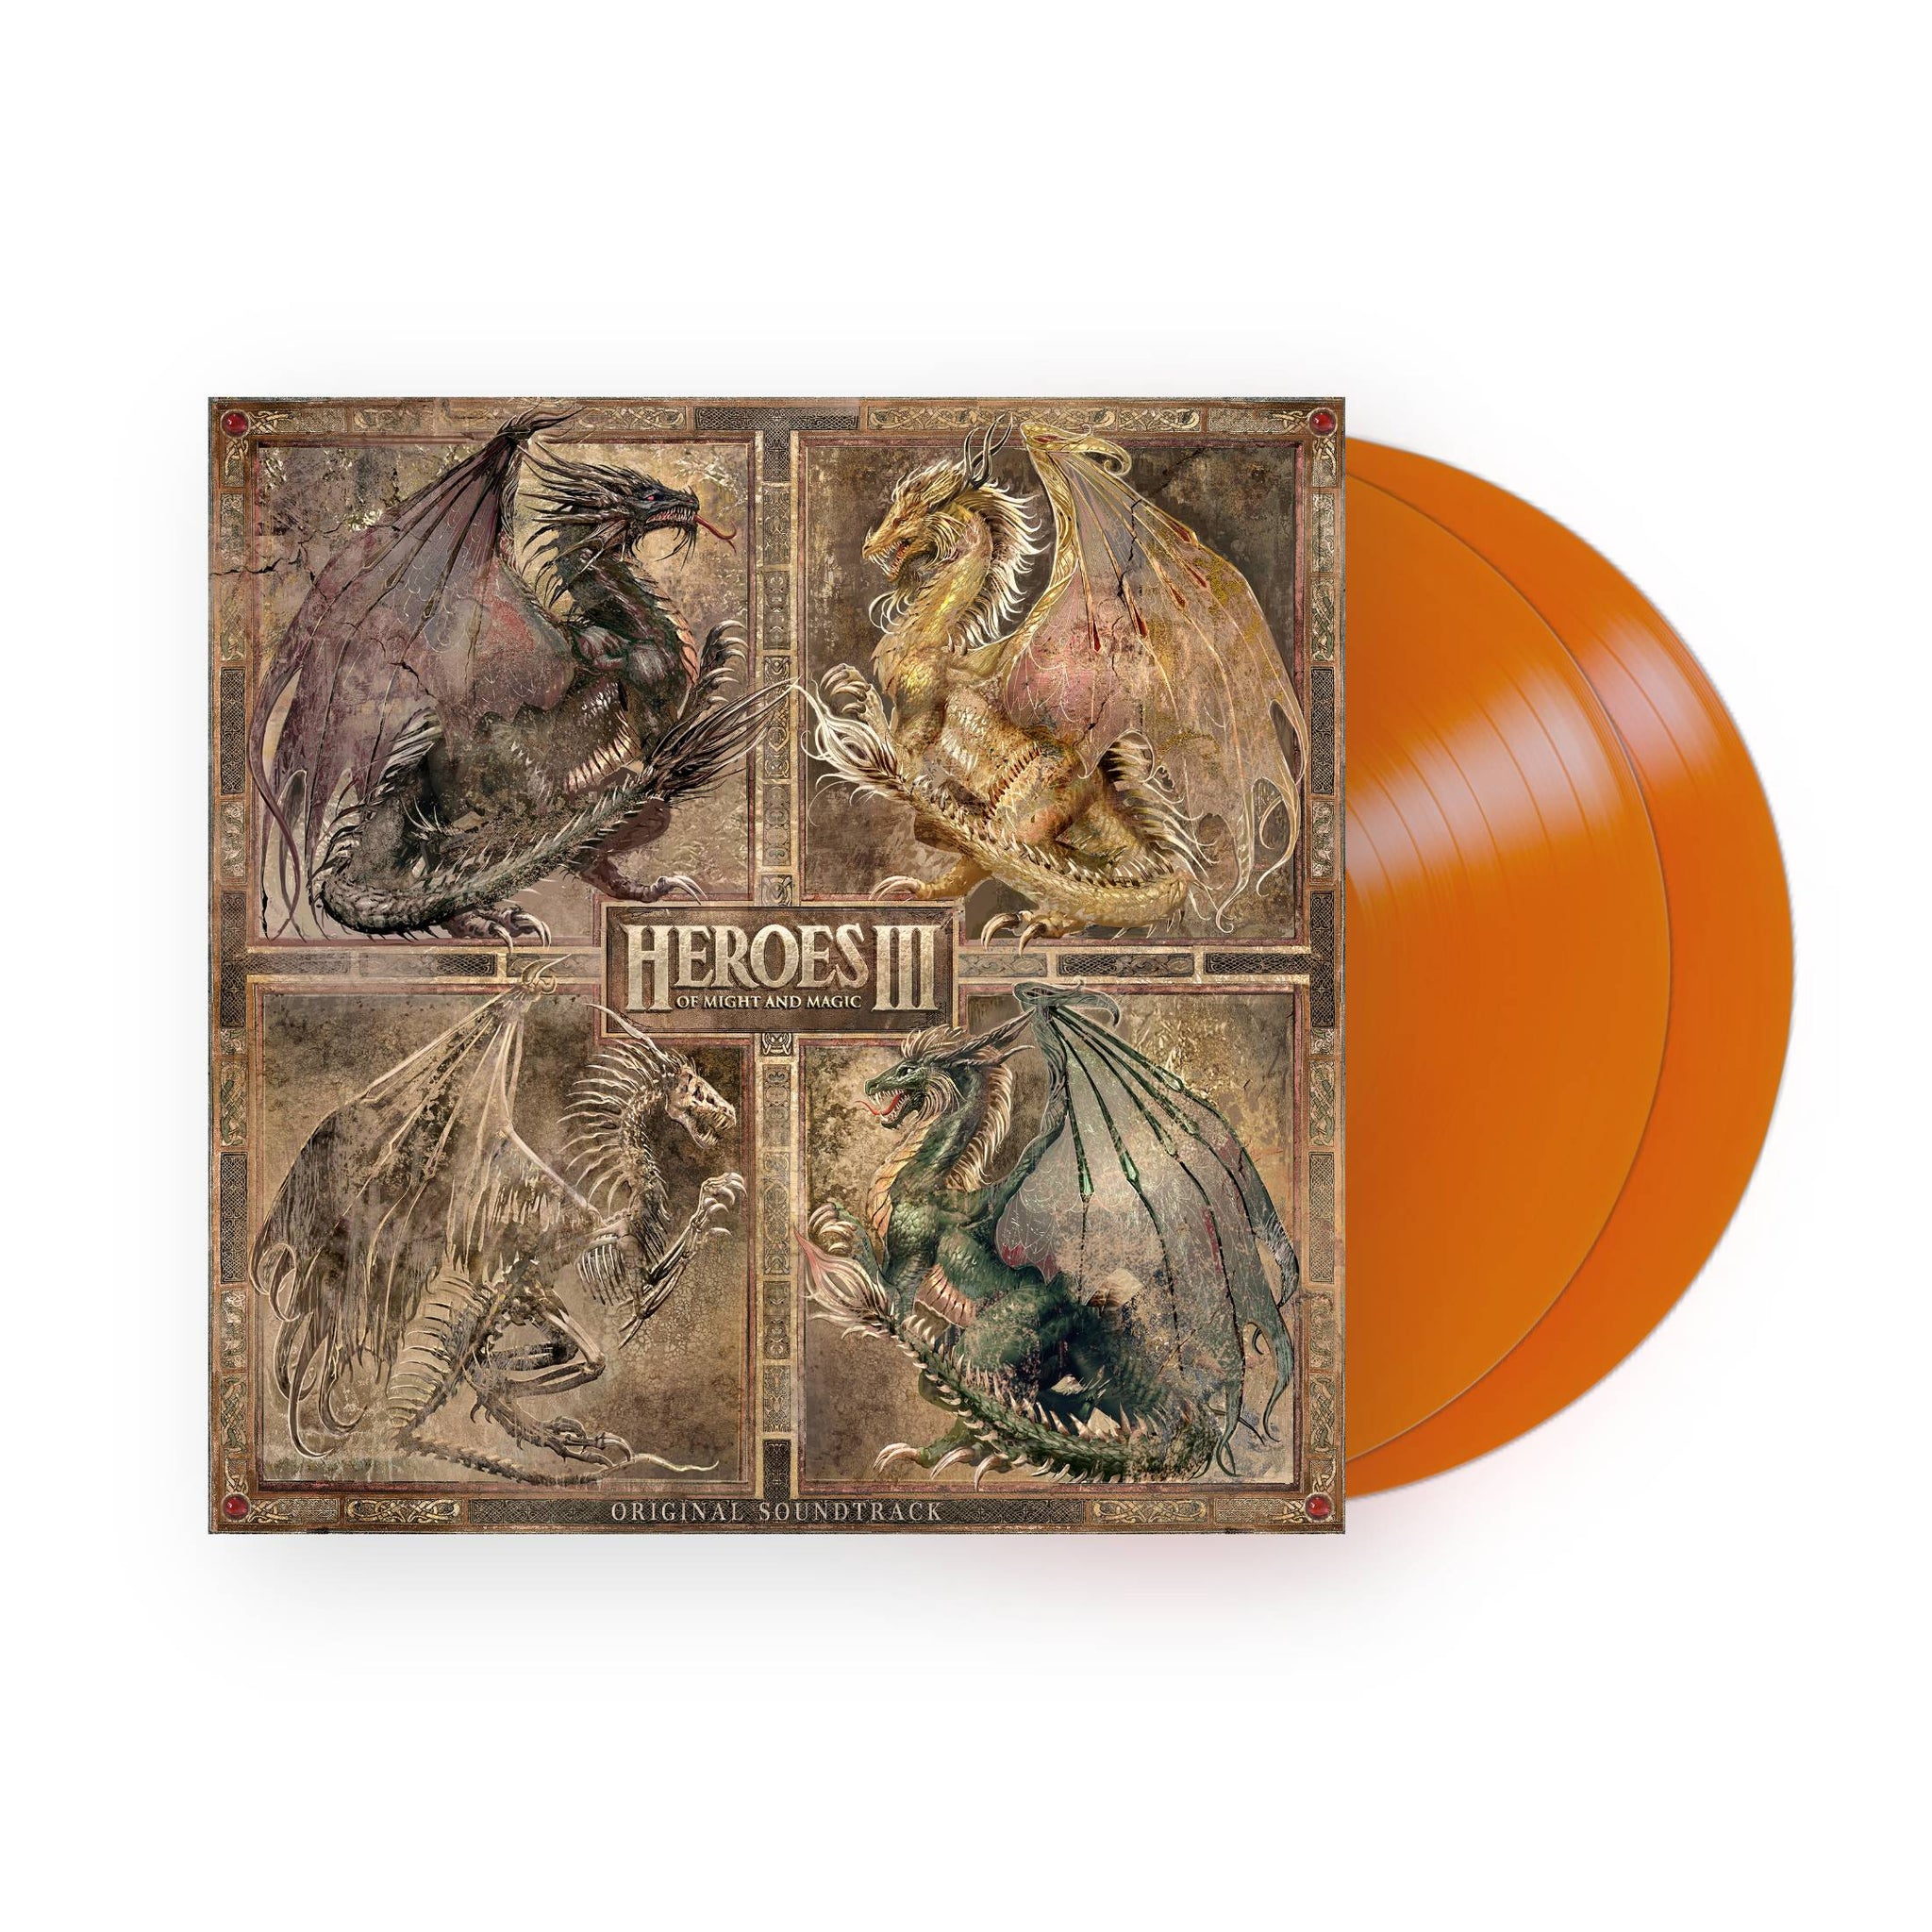 Heroes of Might and Magic III (Original Soundtrack) by Paul Anthony Romero  Rob King 2xLP  (Conflux Orange Vinyl)